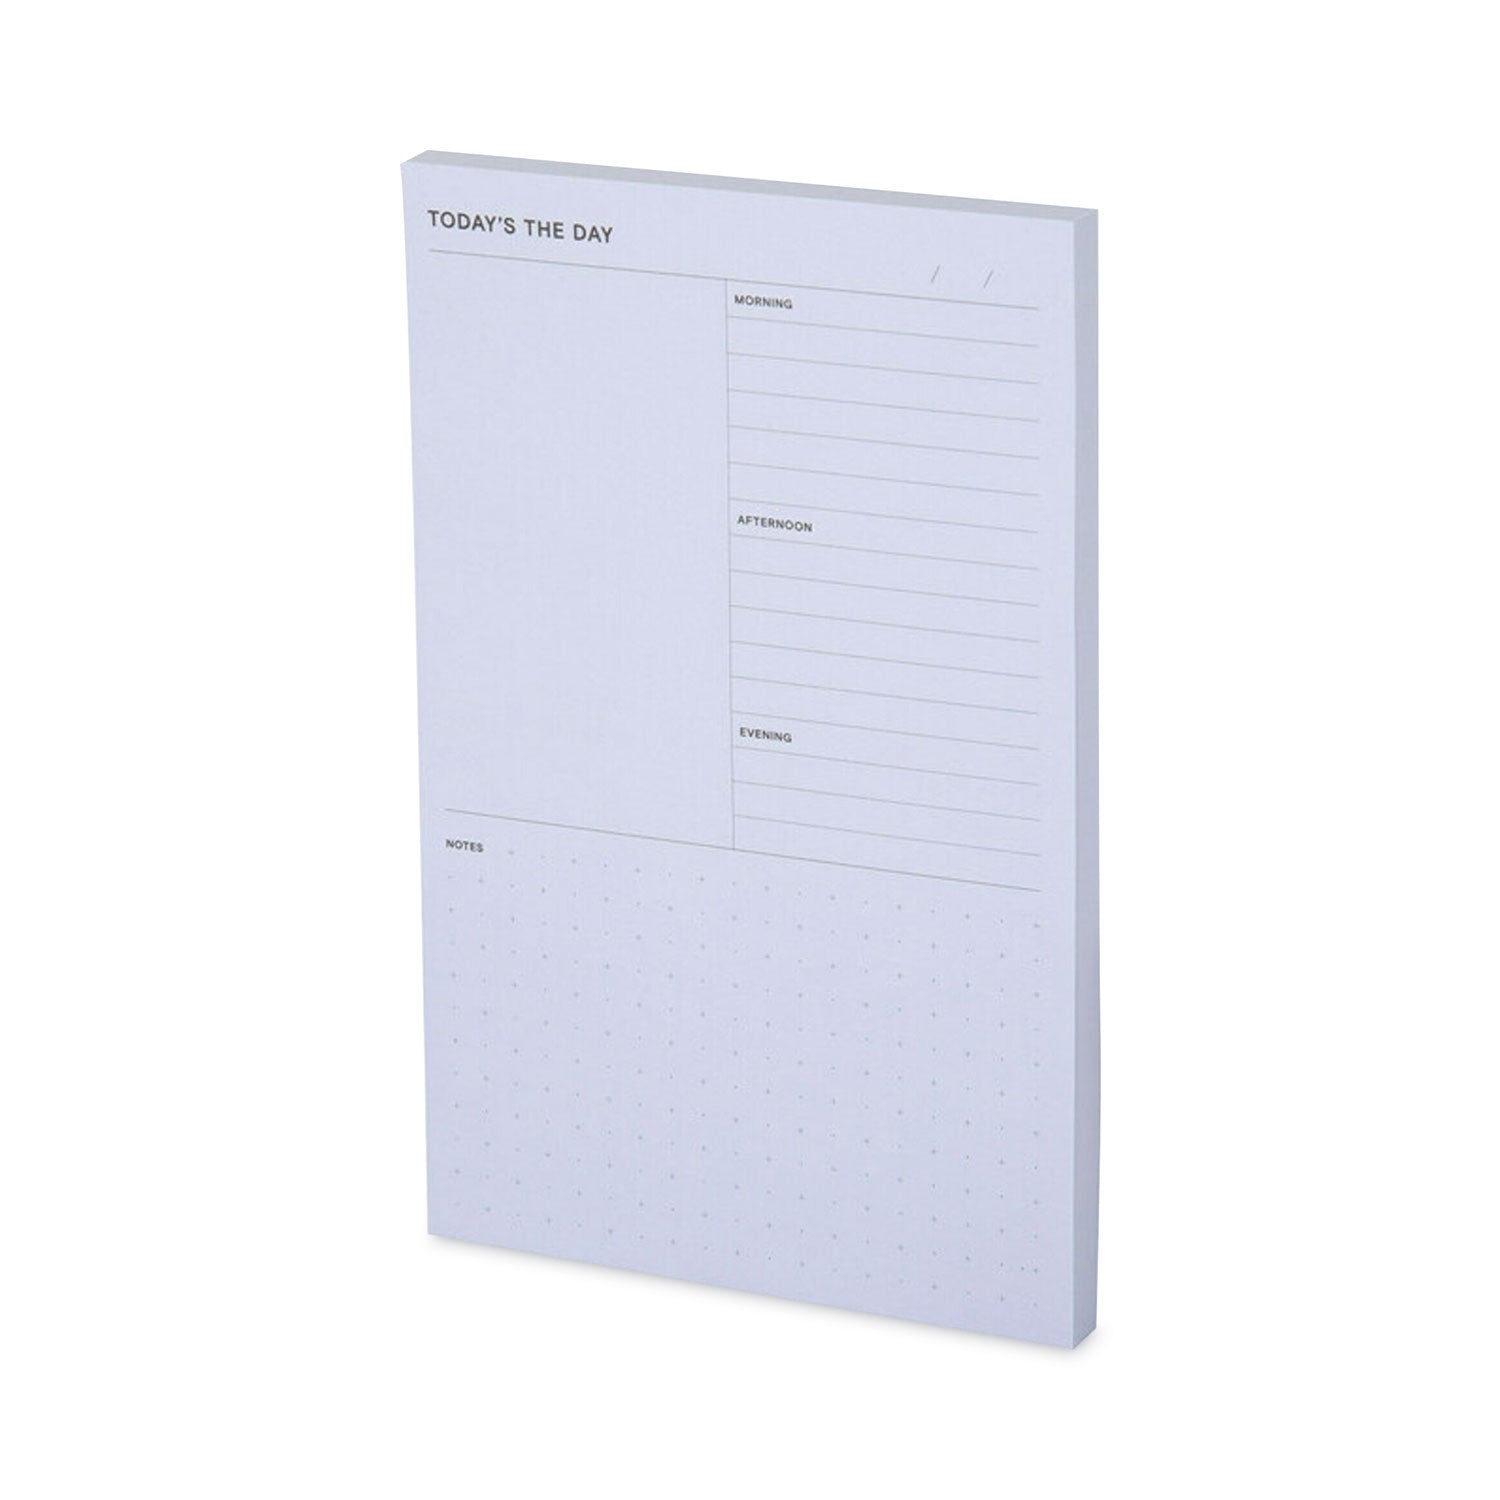 adhesive-daily-planner-sticky-note-pads-daily-planner-format-49-x-77-blue-100-sheets-pad_mmm58blu - 5